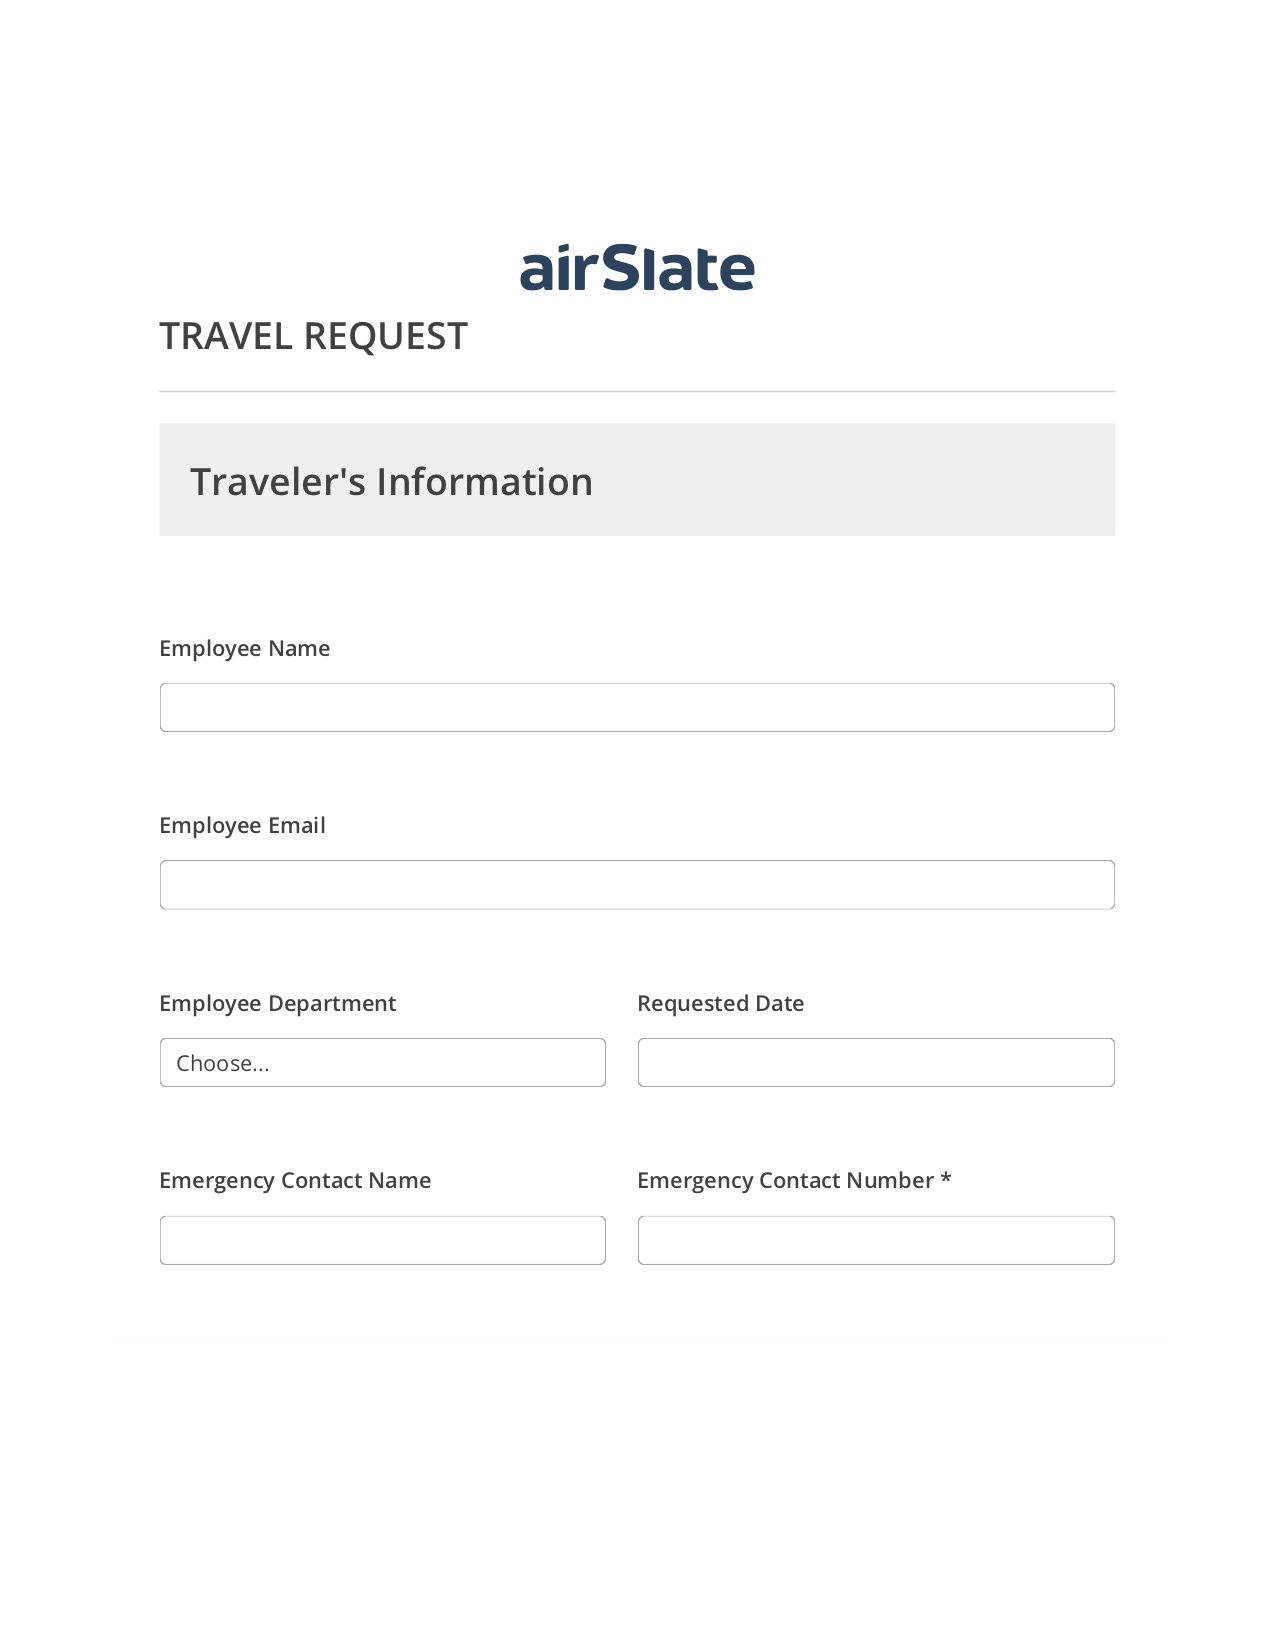 Travel Request Flow Pre-fill from NetSuite Records Bot